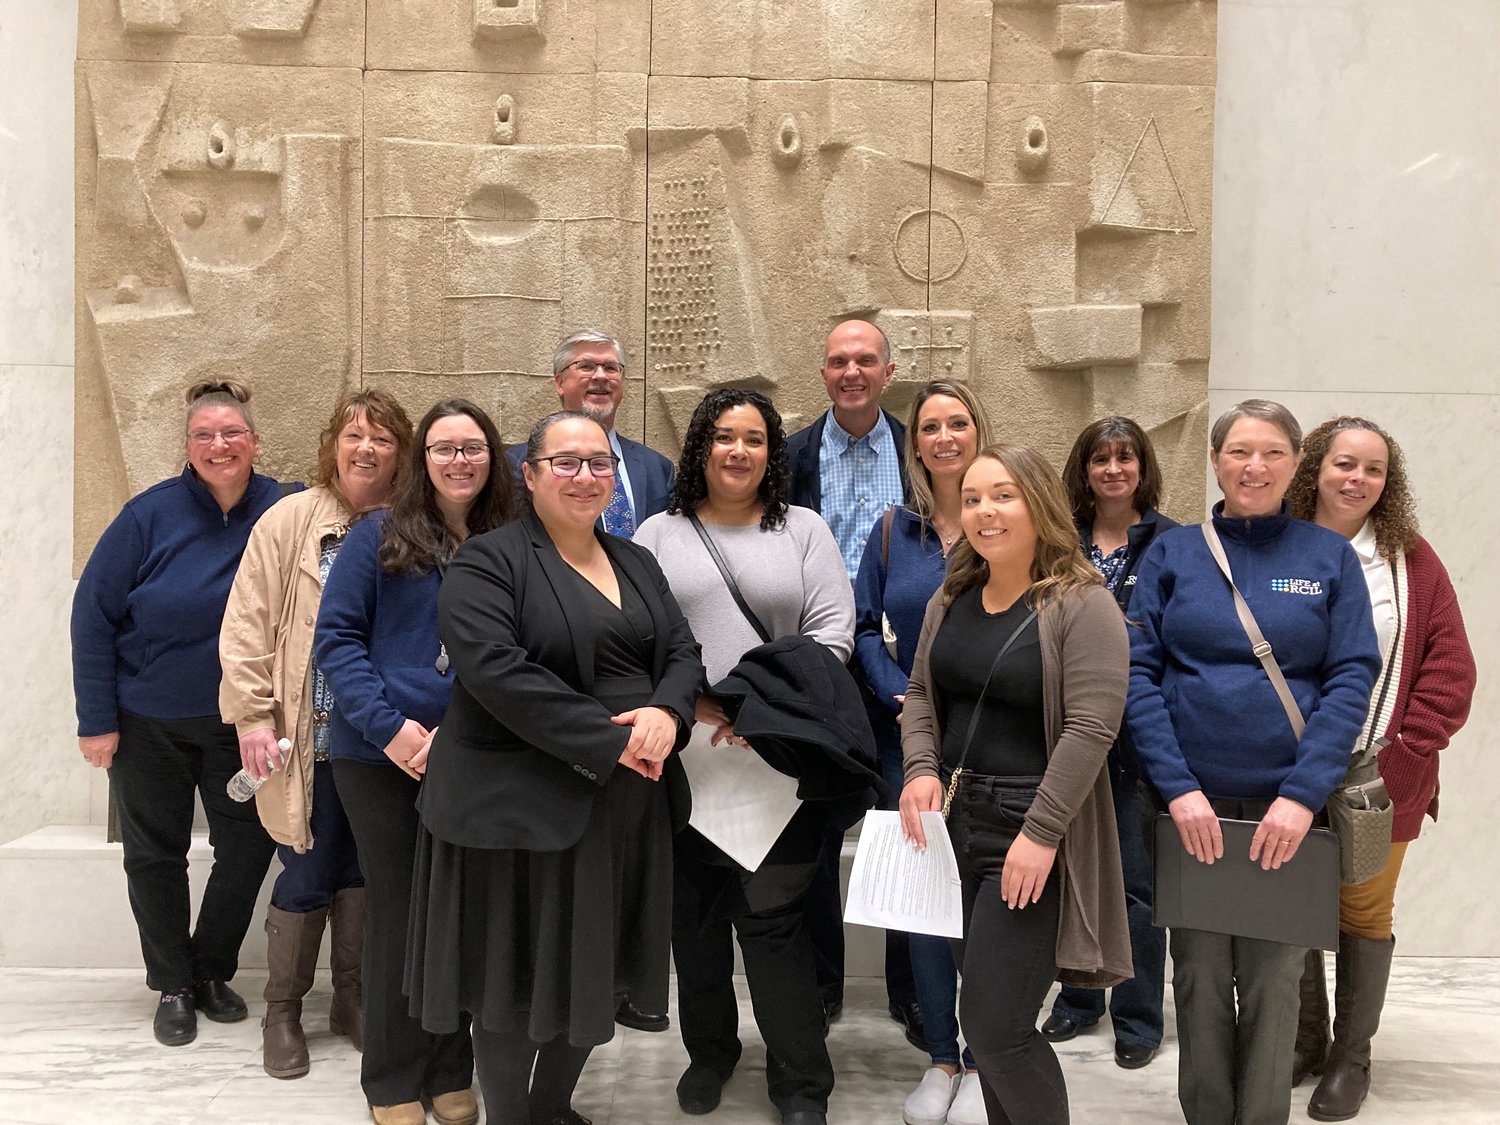 A group of RCIL team members met with multiple New York Assembly members and Senators about the purpose and mission of independent living centers while providing support for or opposition to various aspects of Governor Hochul’s proposed budget for fiscal year 2023-2024 as they relate to the funding of the supports and services RCIL provides, as well as funding for the pay of those who work with individuals able to live safely in their own homes and communities of their choice rather than in facilities or institutions.